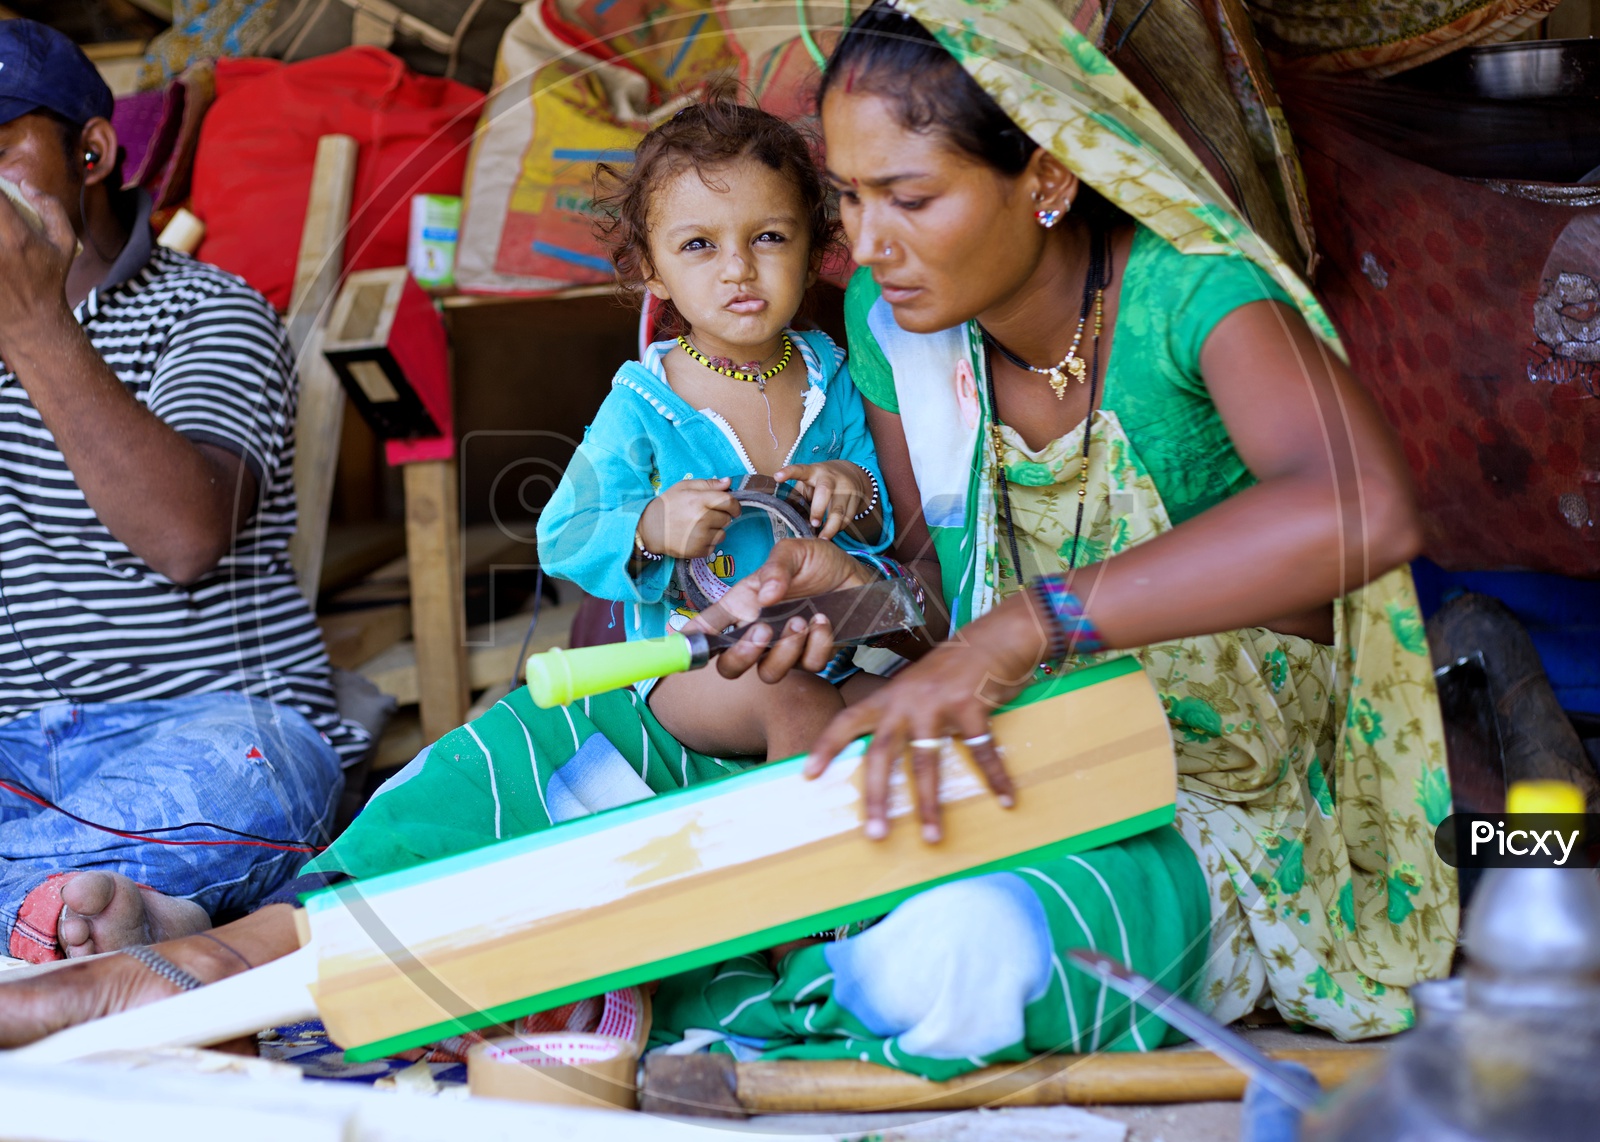 A local women cricket bat maker making bats with having her son on her lap.